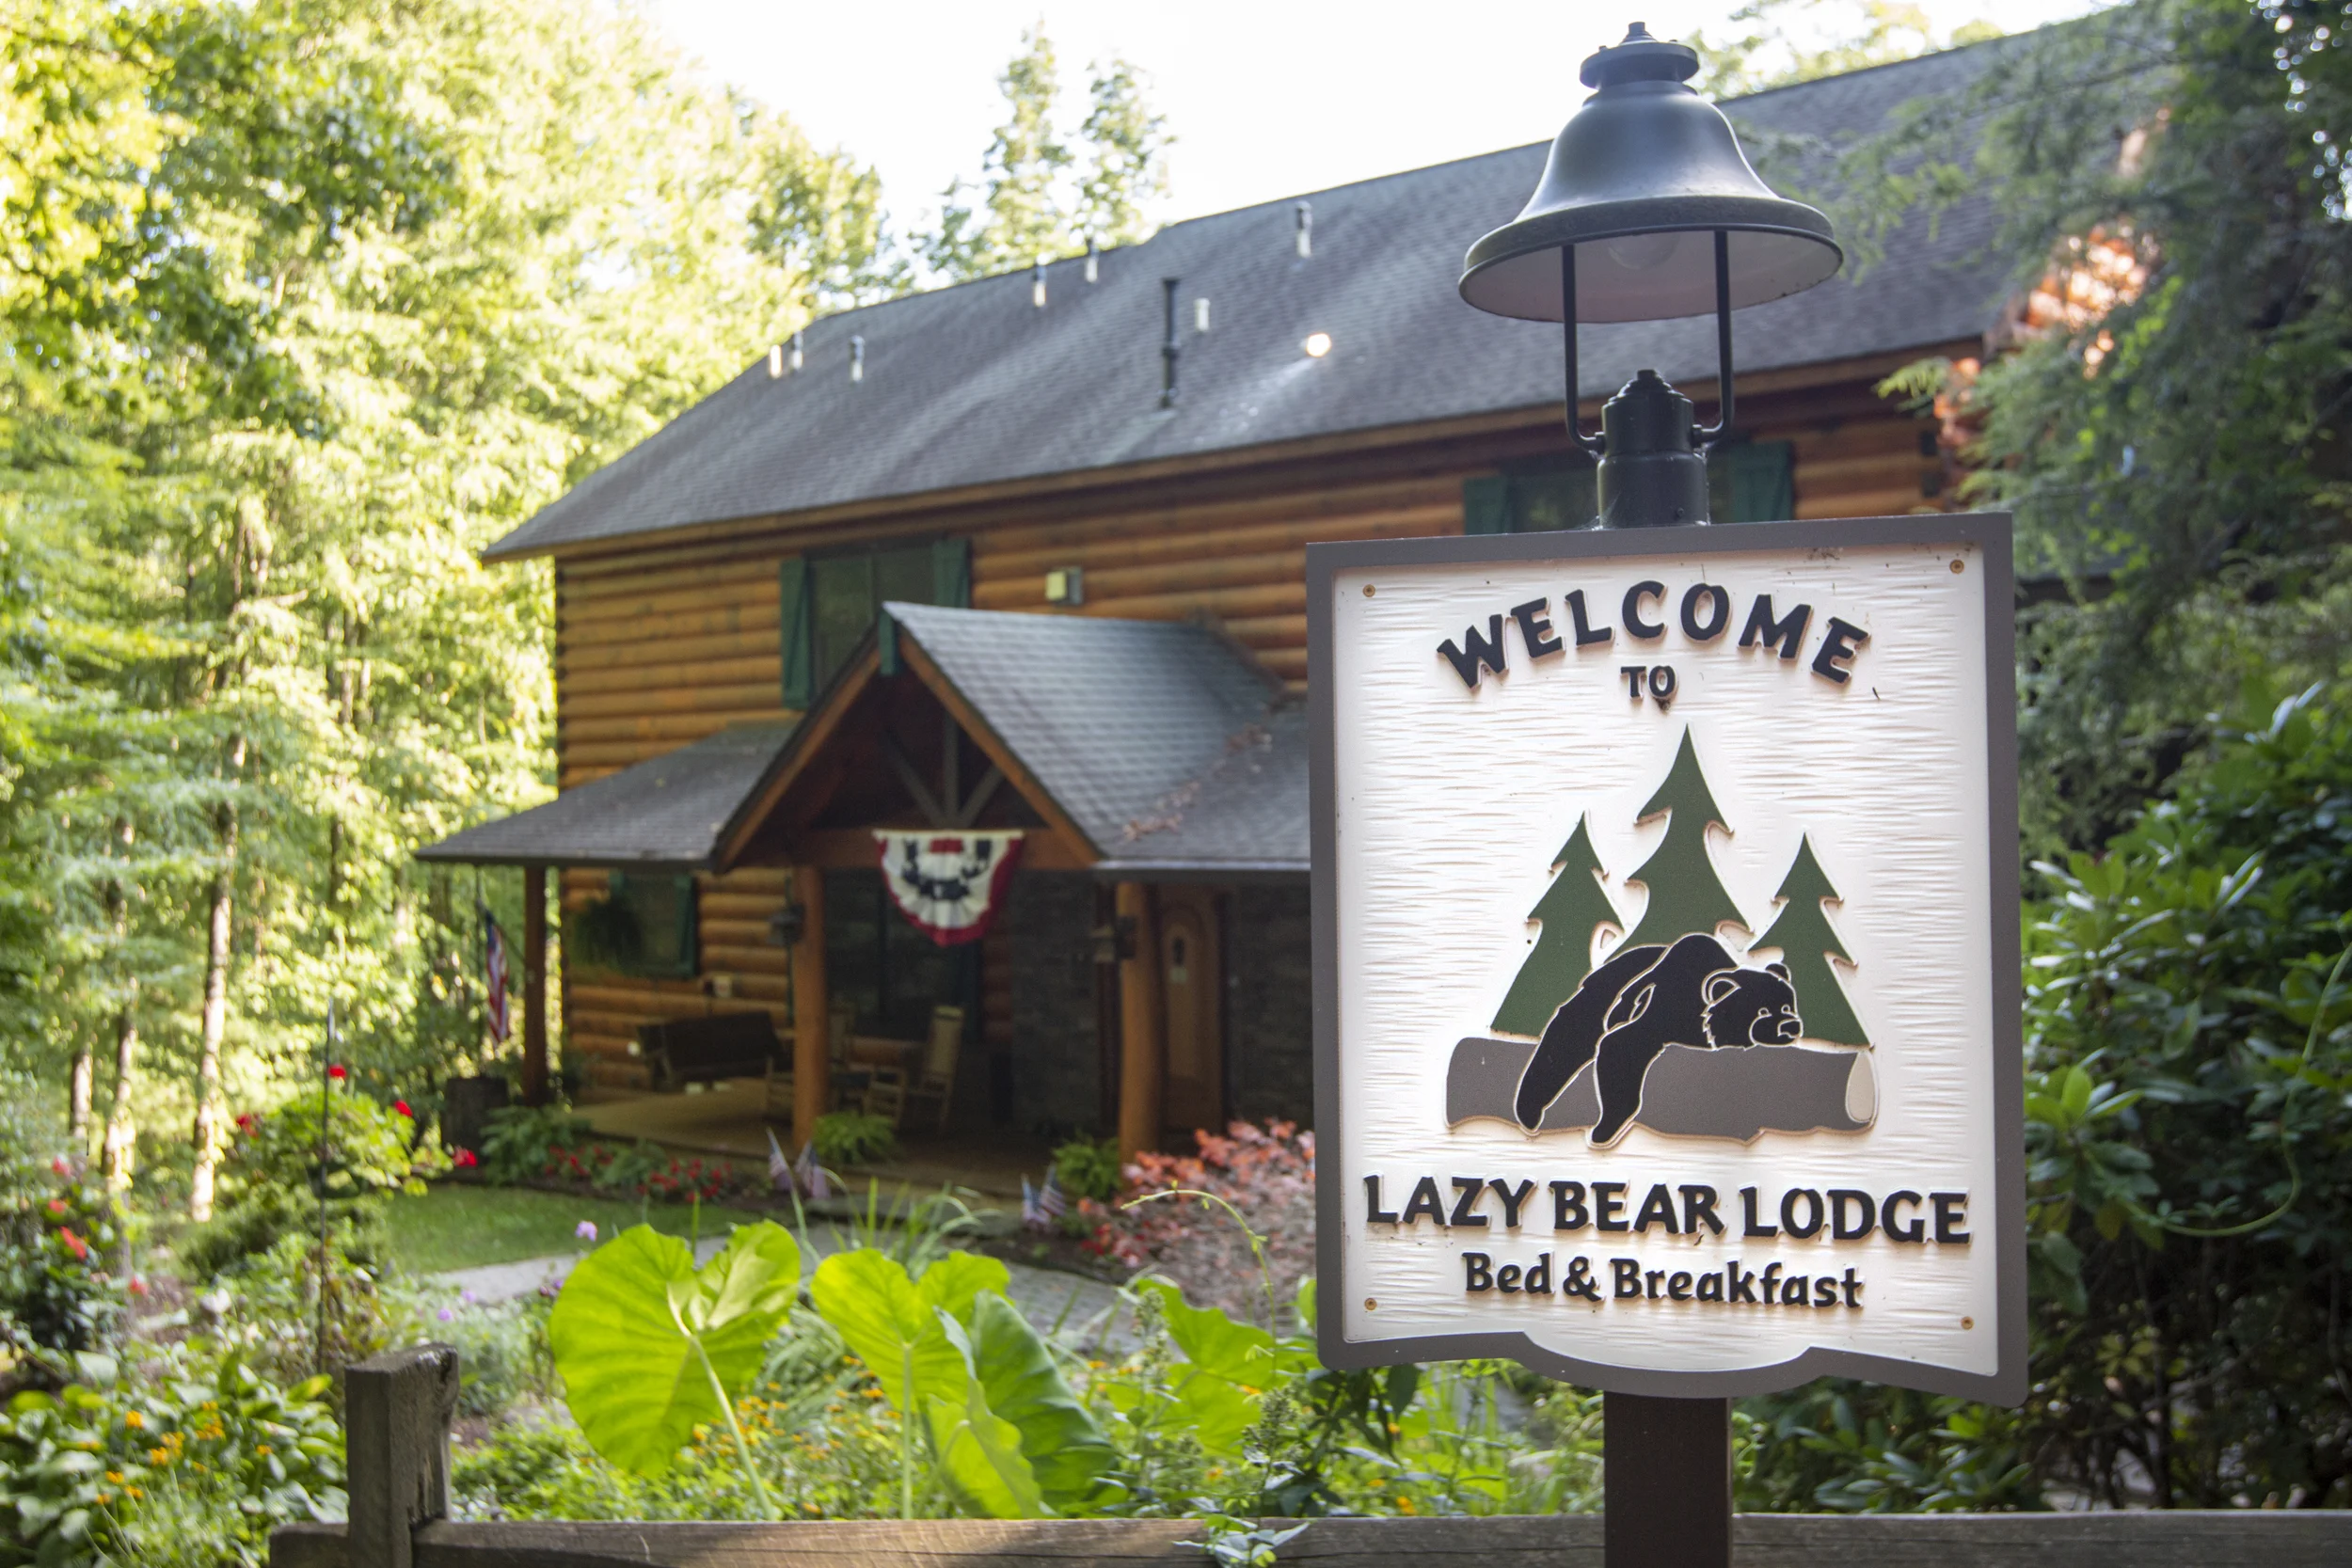 The front view of the Lazy Bear Lodge log cabin with large front porch.